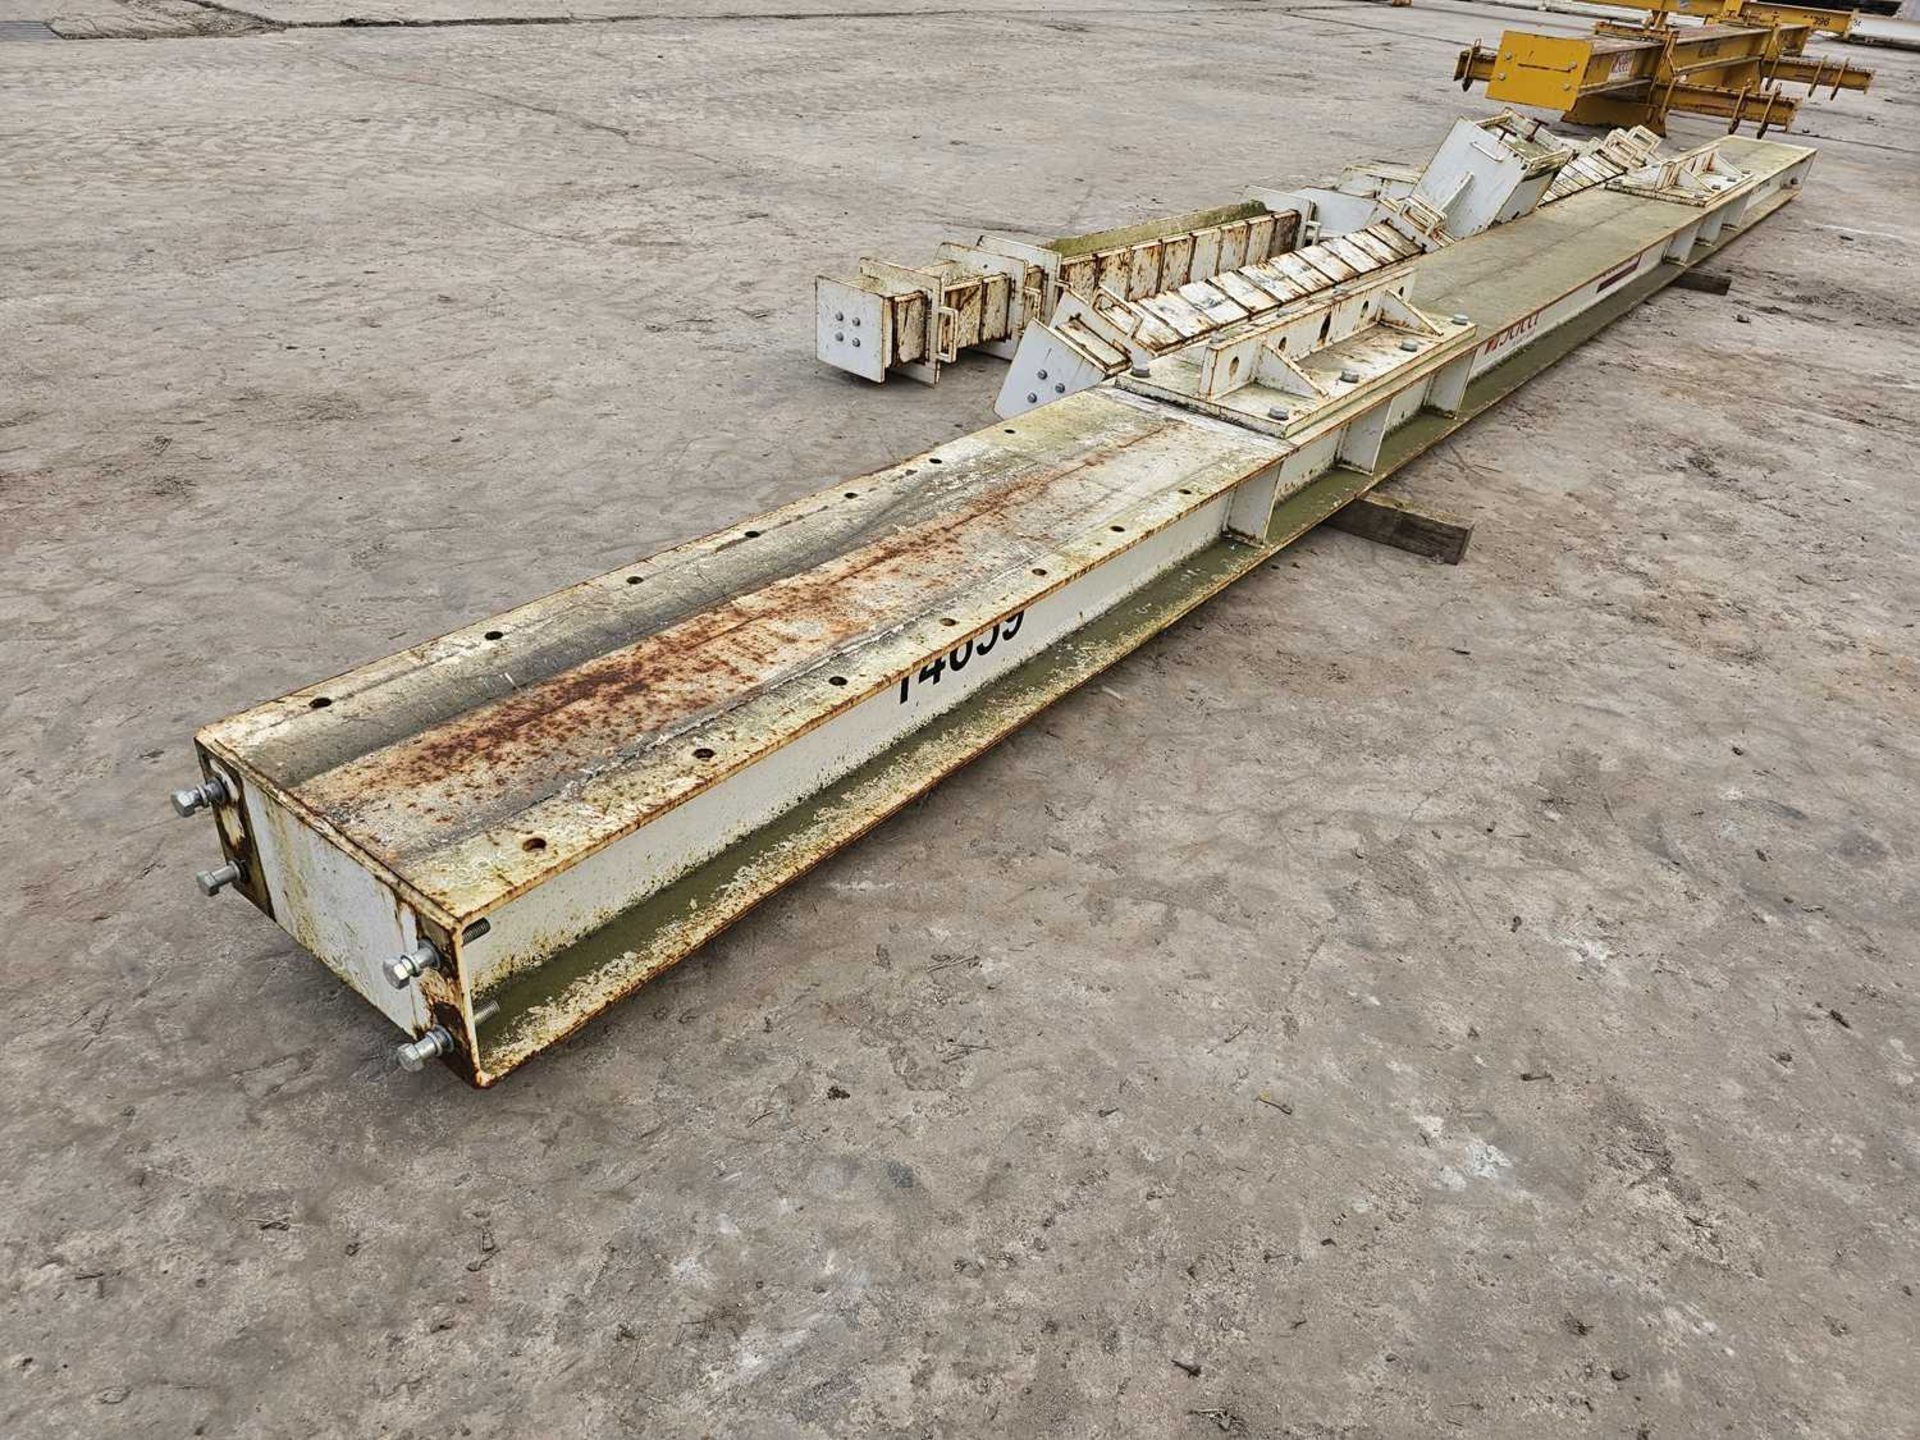 2019 Section Lift 9.7m x 5.8m Adjustable 5.5 Ton Multi Point Spreader Beam - Image 2 of 7